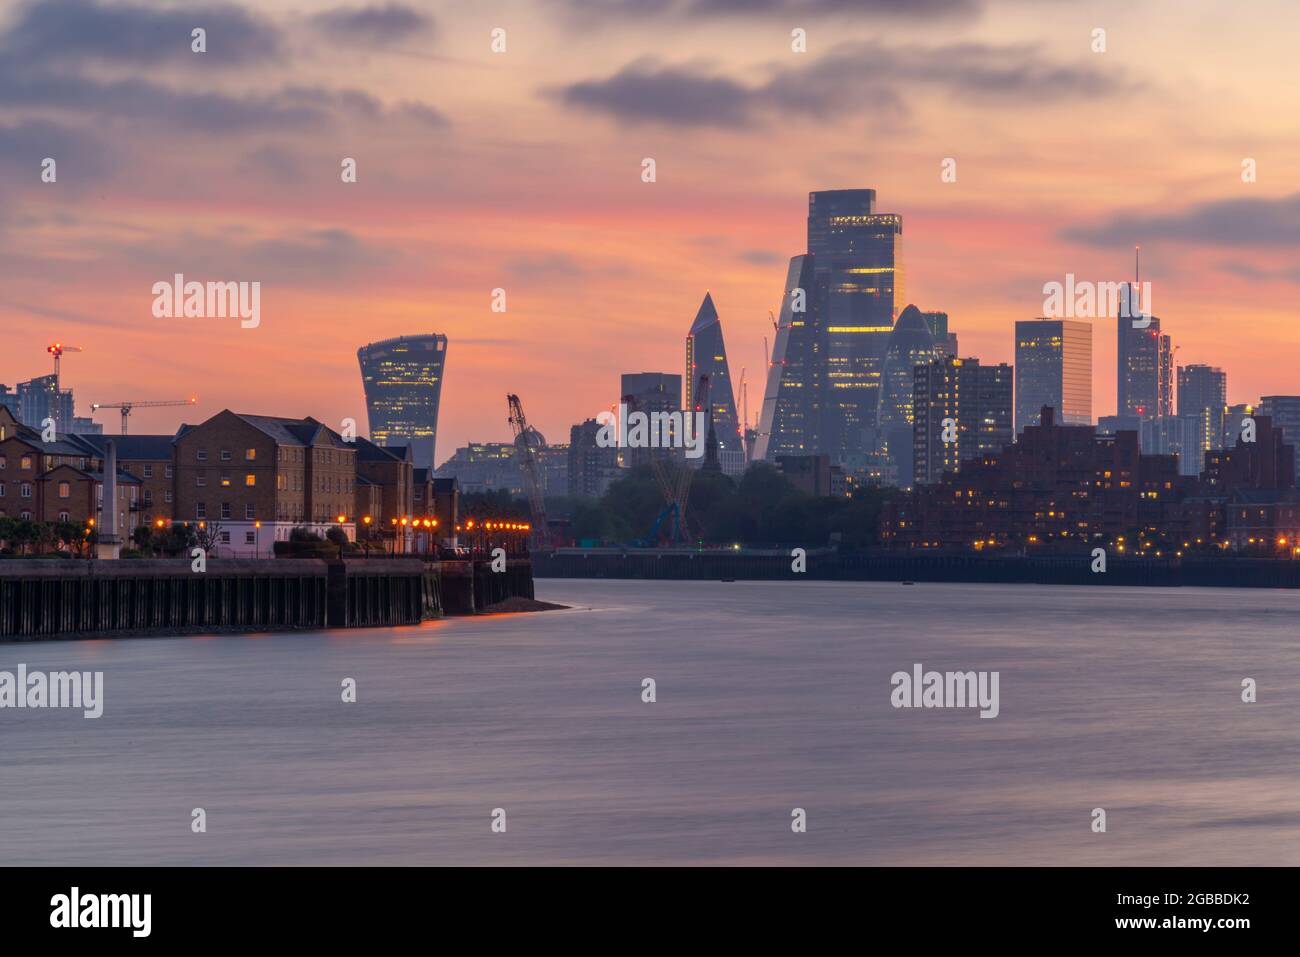 View of The City skyline at sunset from the Thames Path, London, England, United Kingdom, Europe Stock Photo